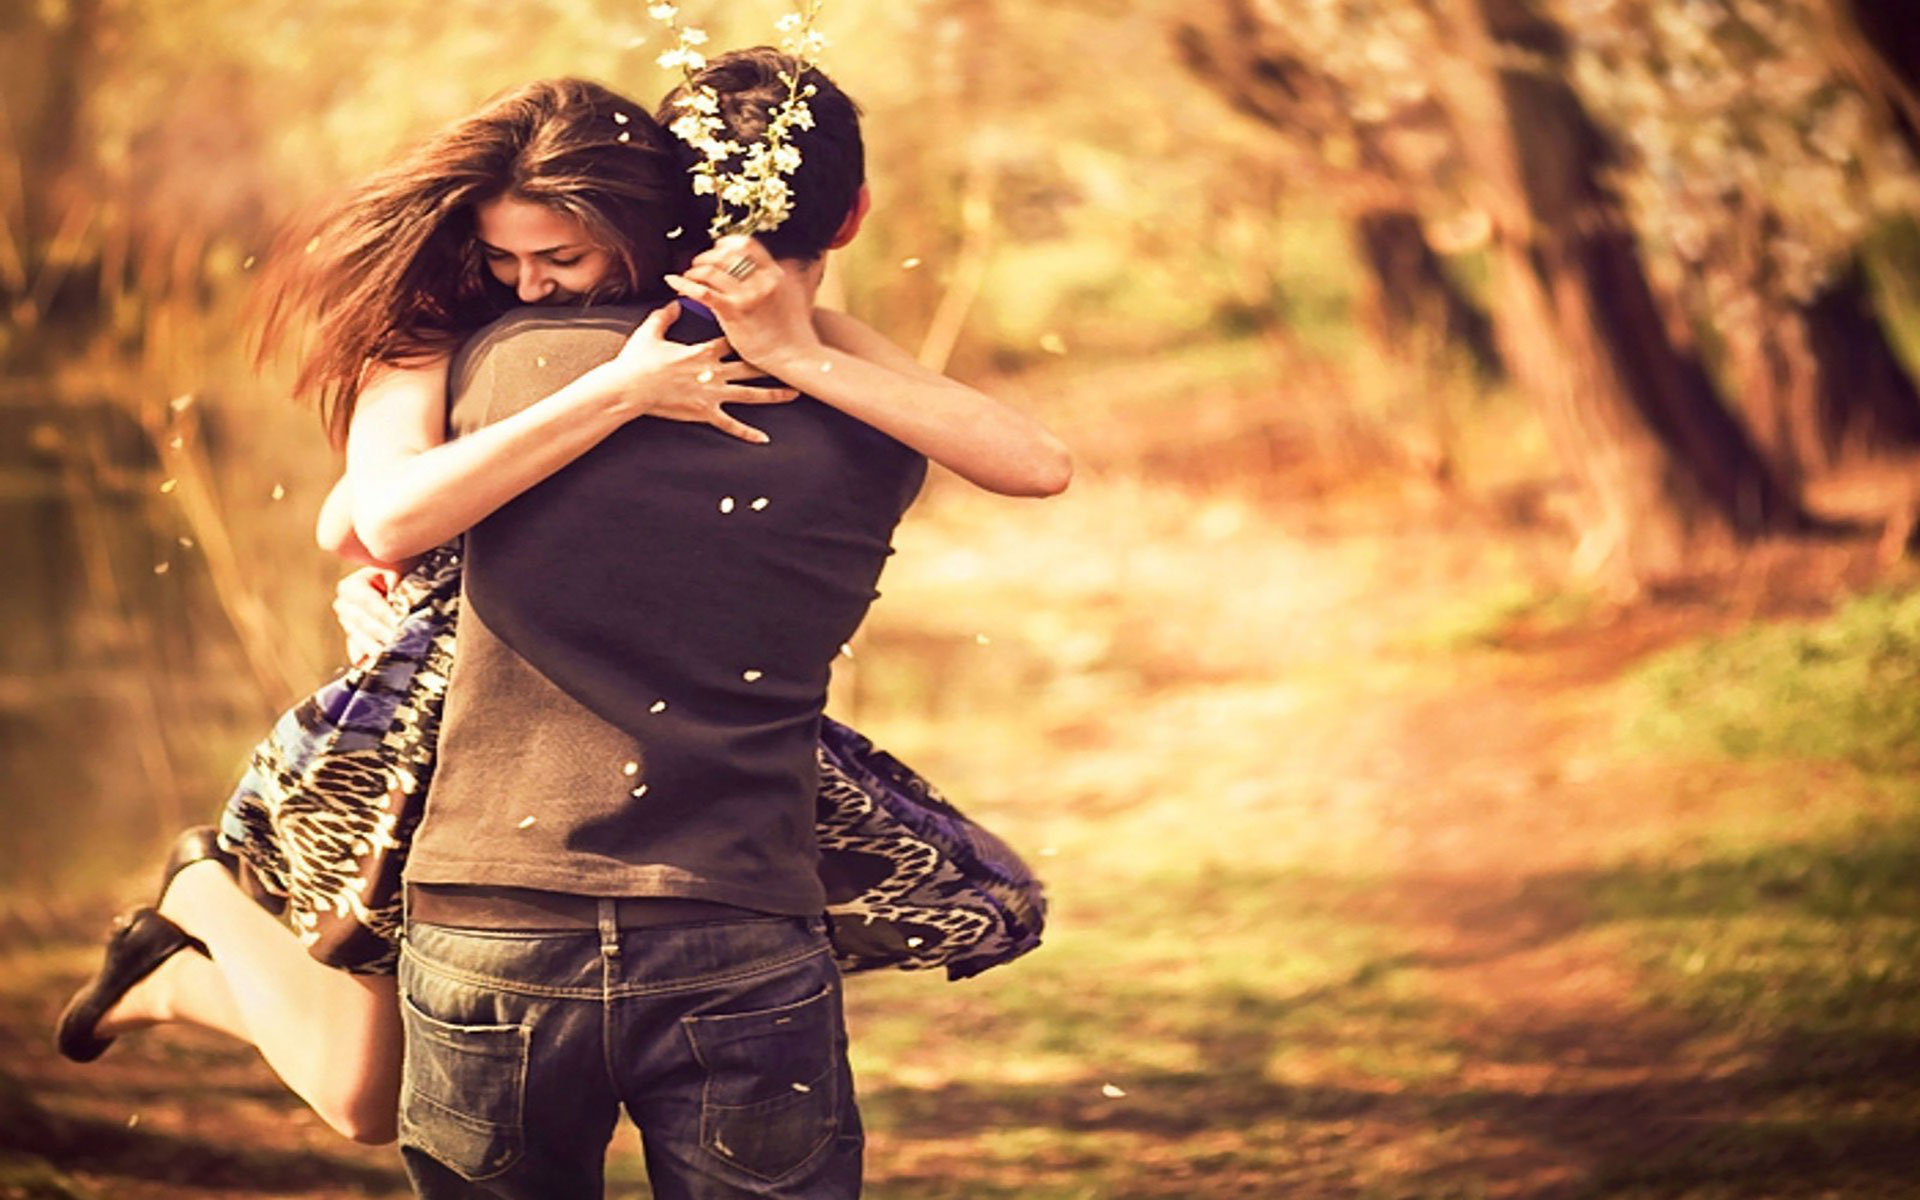 Cute Couple Hug Wallpapers | Pictures of Lovers Hugging